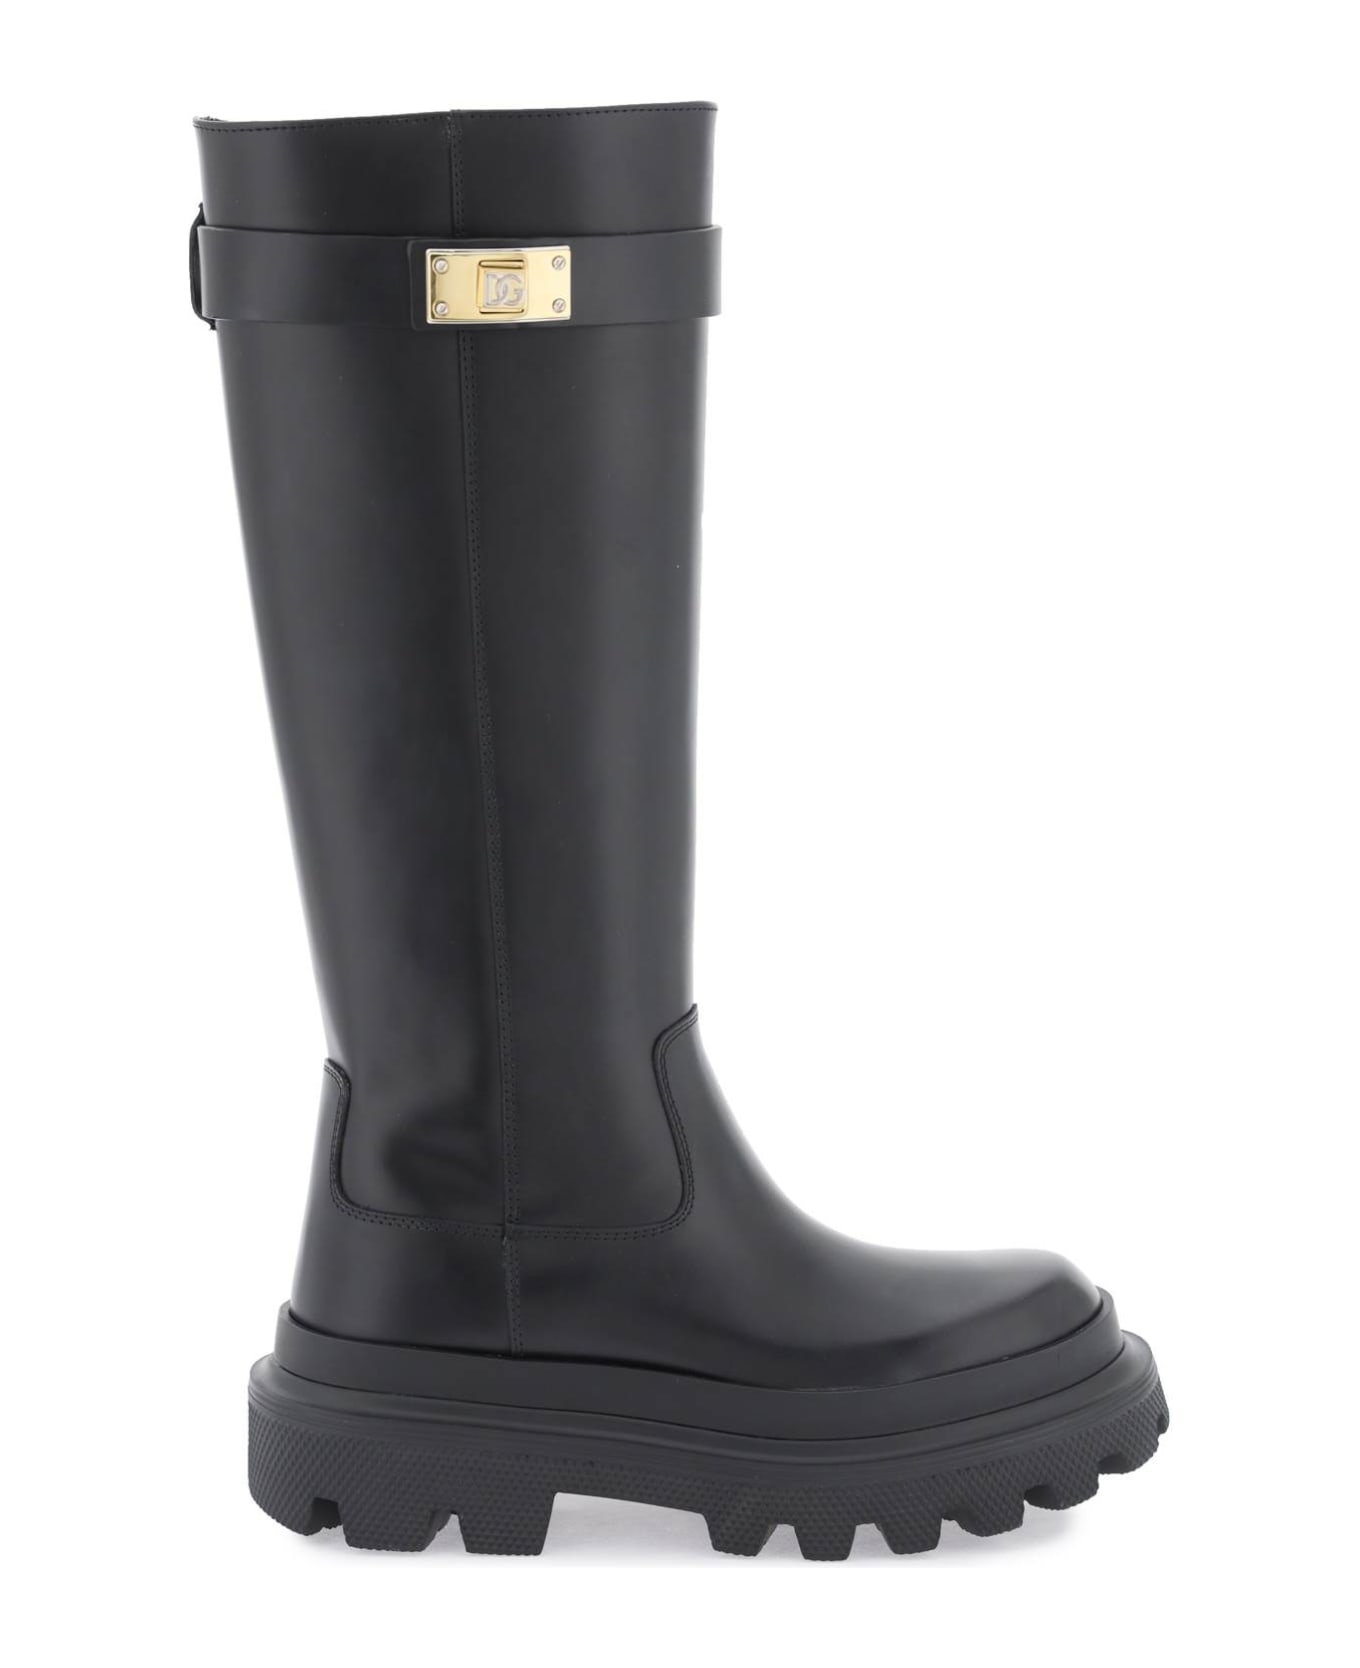 Dolce & Gabbana Leather Boots With Logoed Plaquee - Black ブーツ